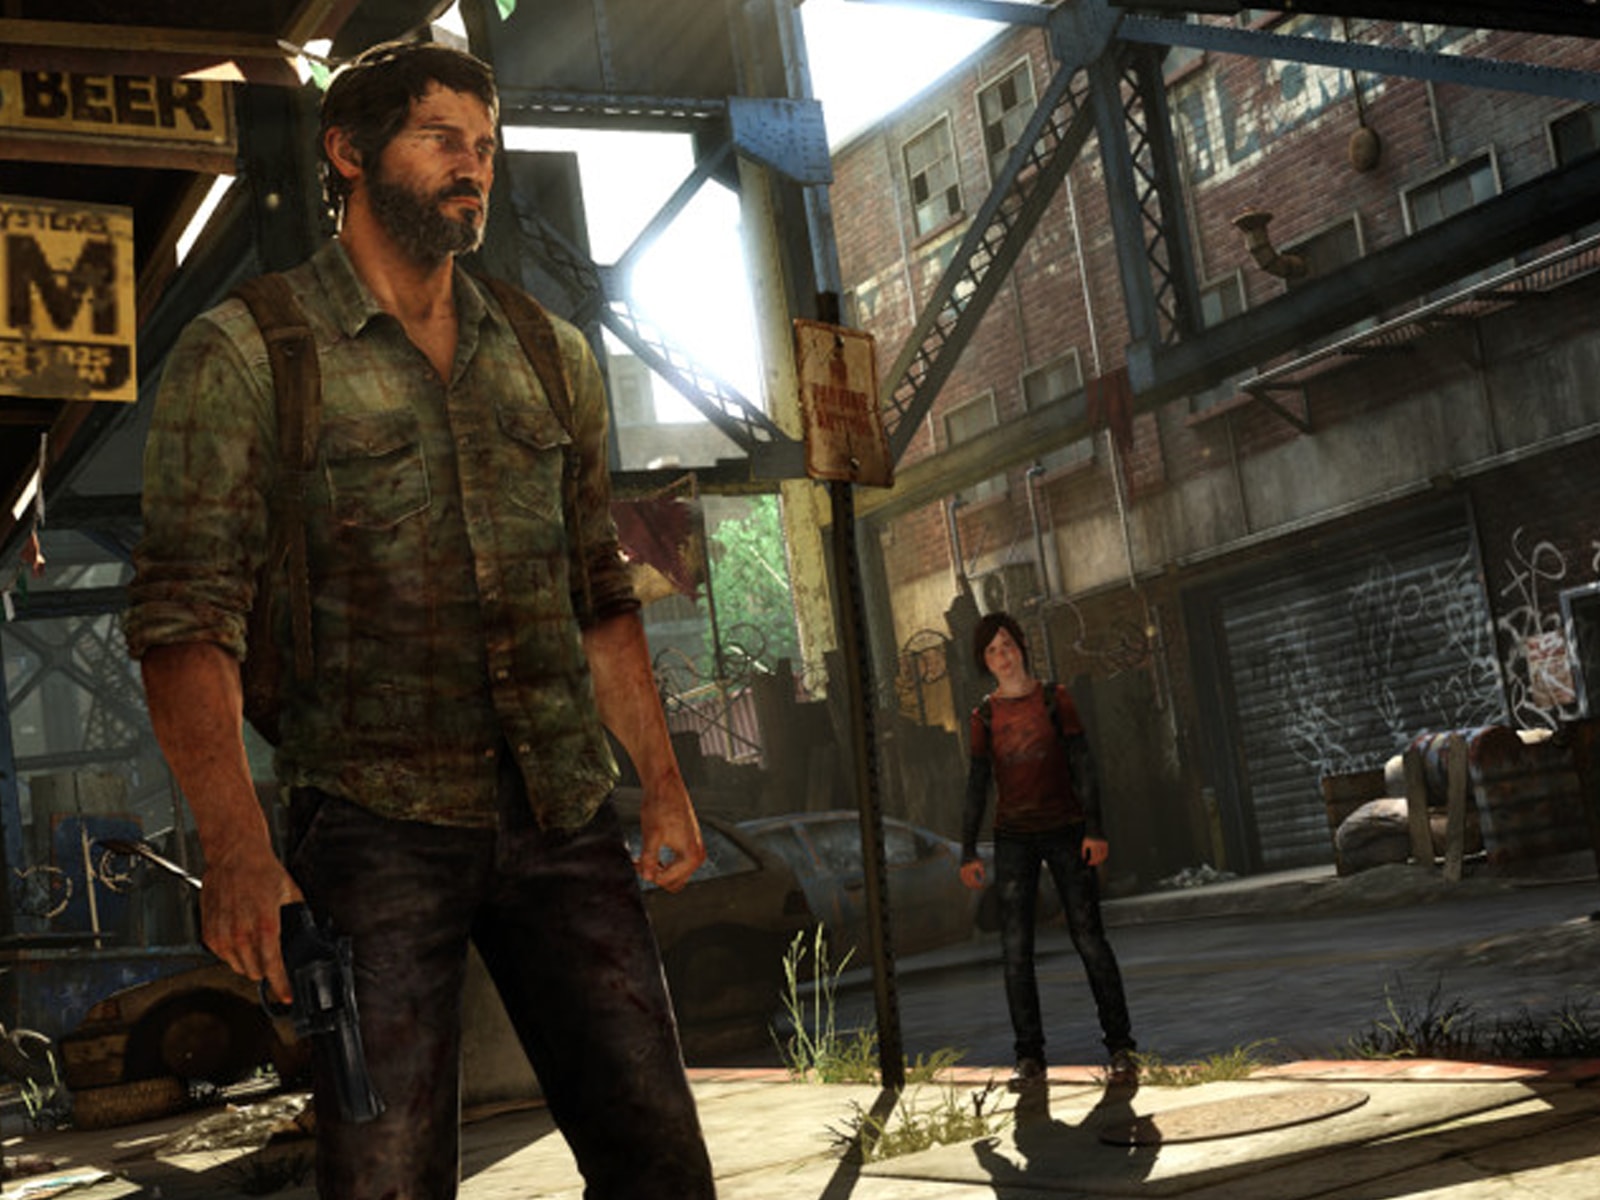 Screenshot from the Naughty Dog game The Last of Us, featuring two characters in a graffiti-covered alley